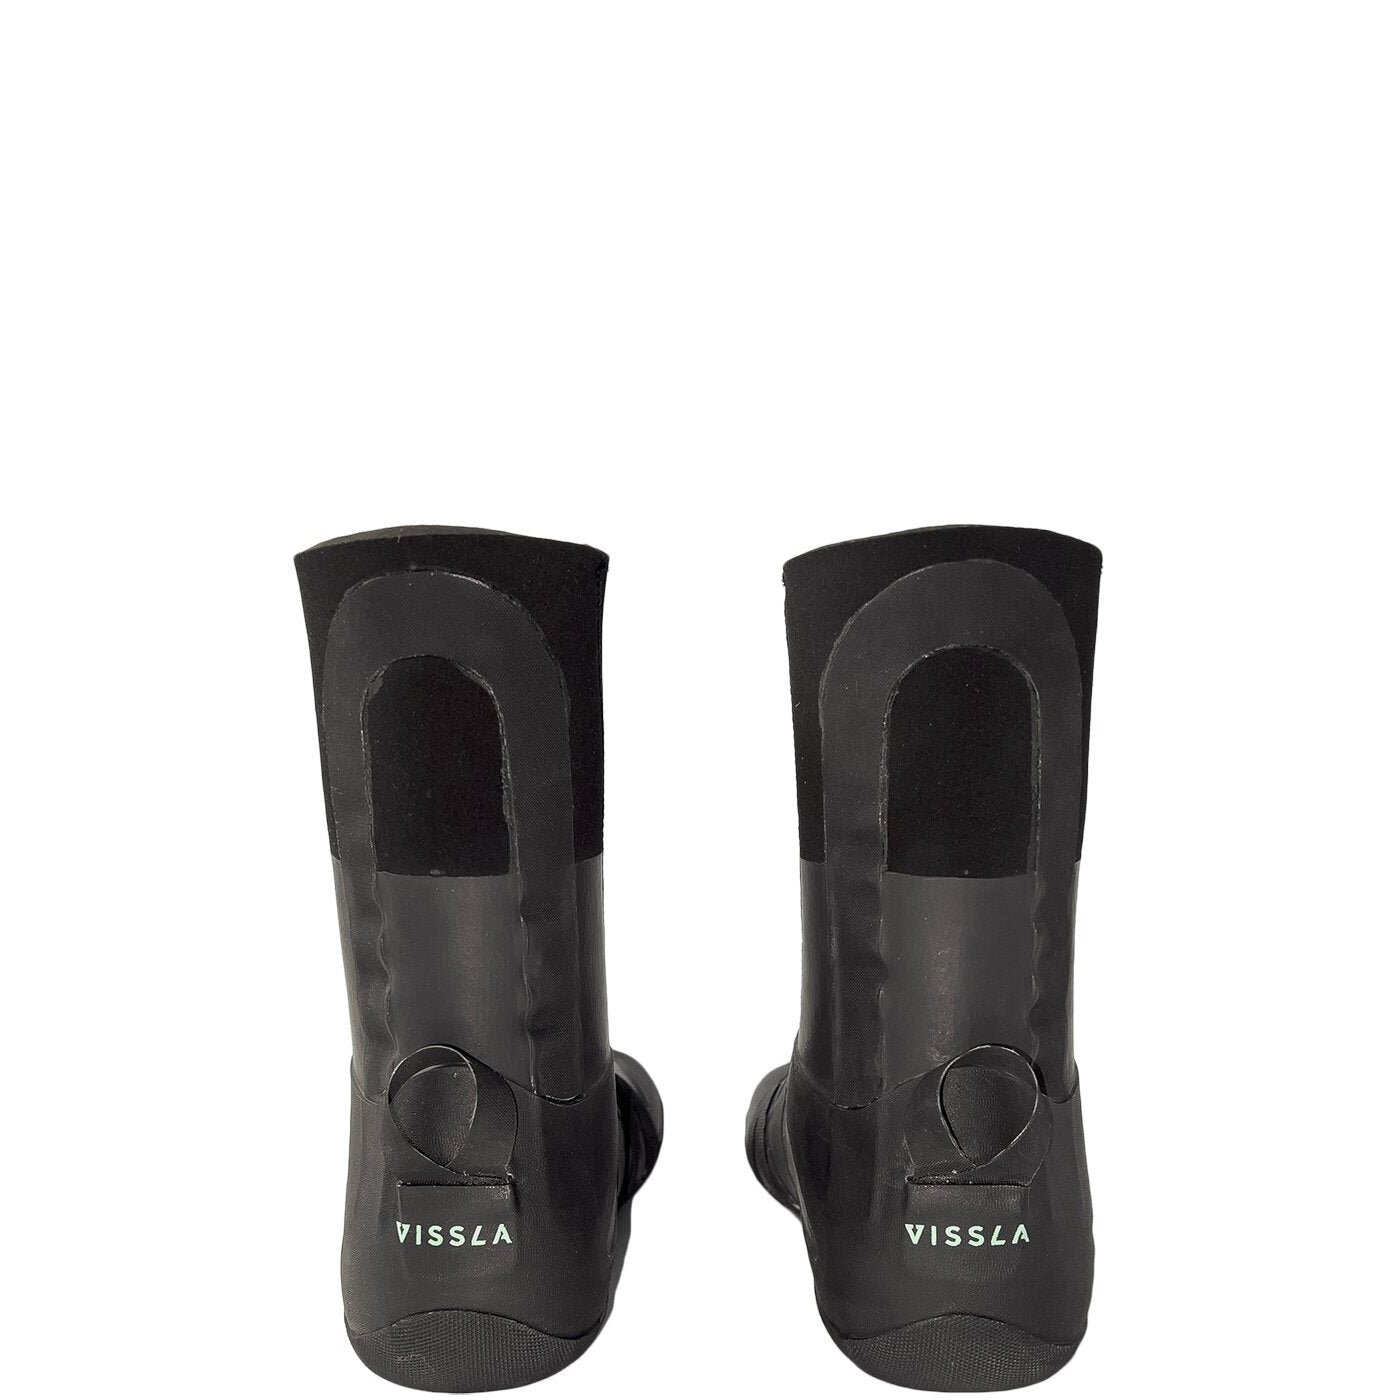 Vissla North Seas Dipped 7Mm Round Toe Wetsuit Boot